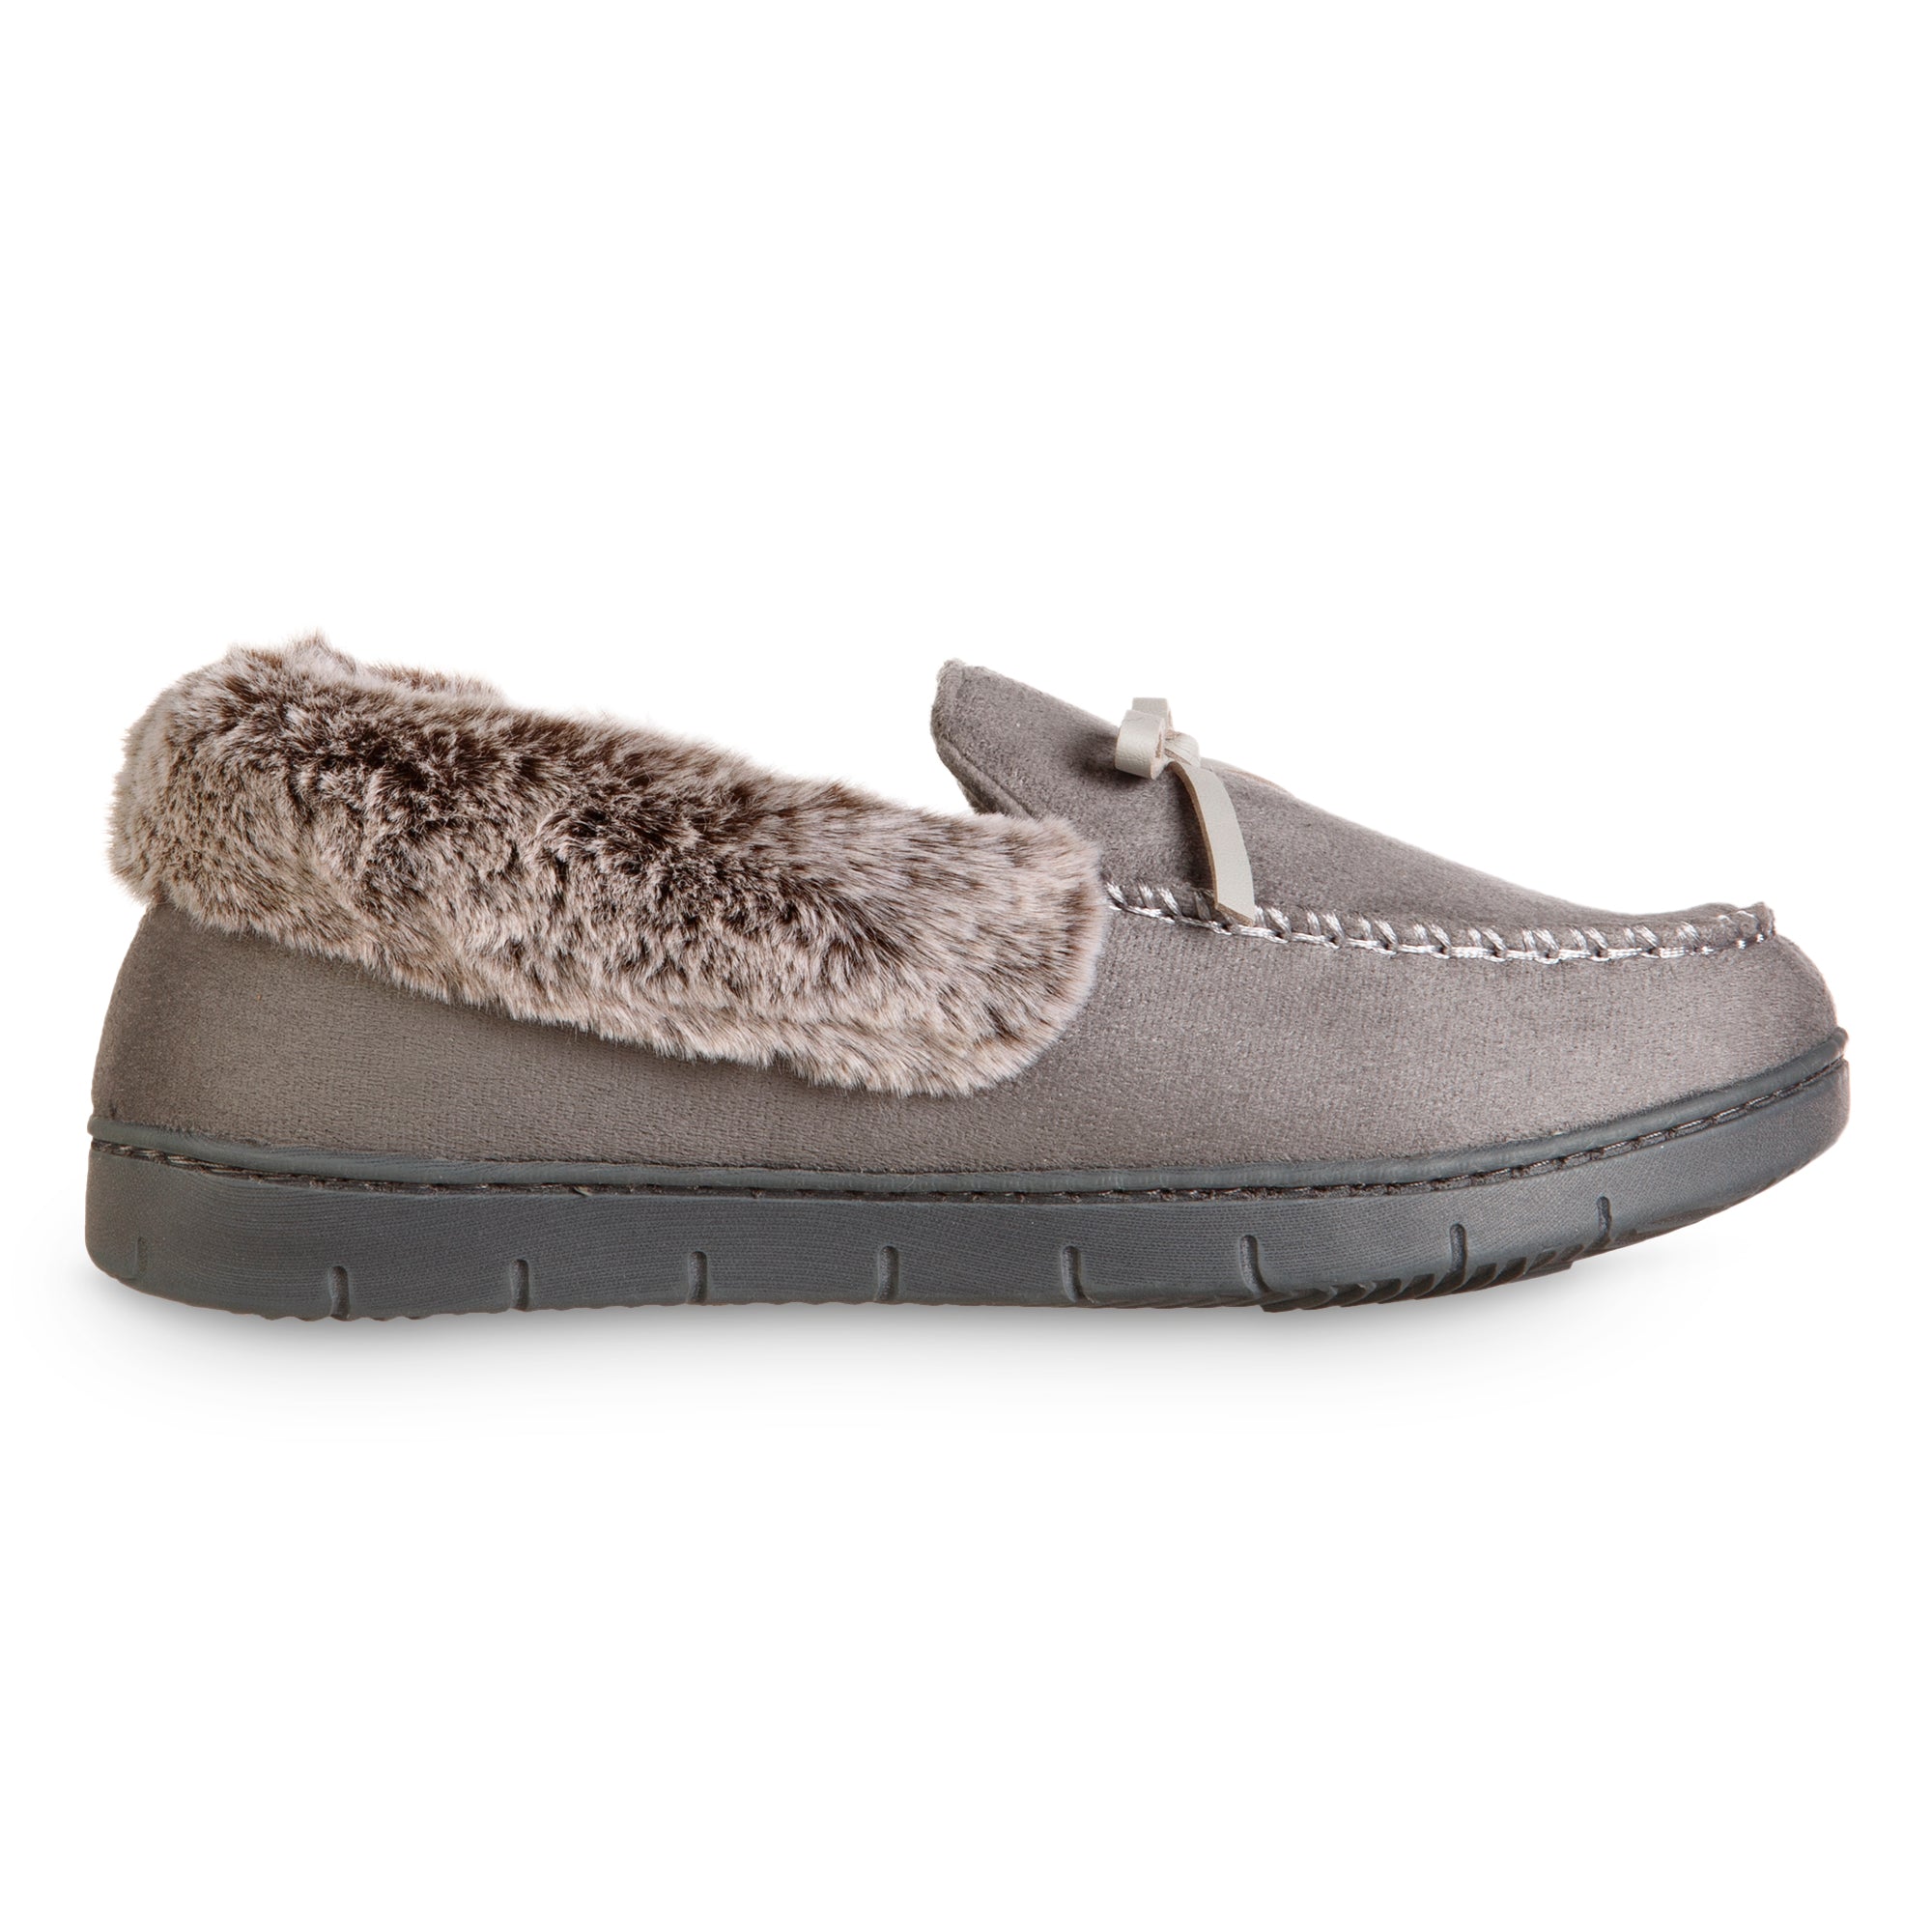 Buy Woodland Women's Moccasins at Amazon.in